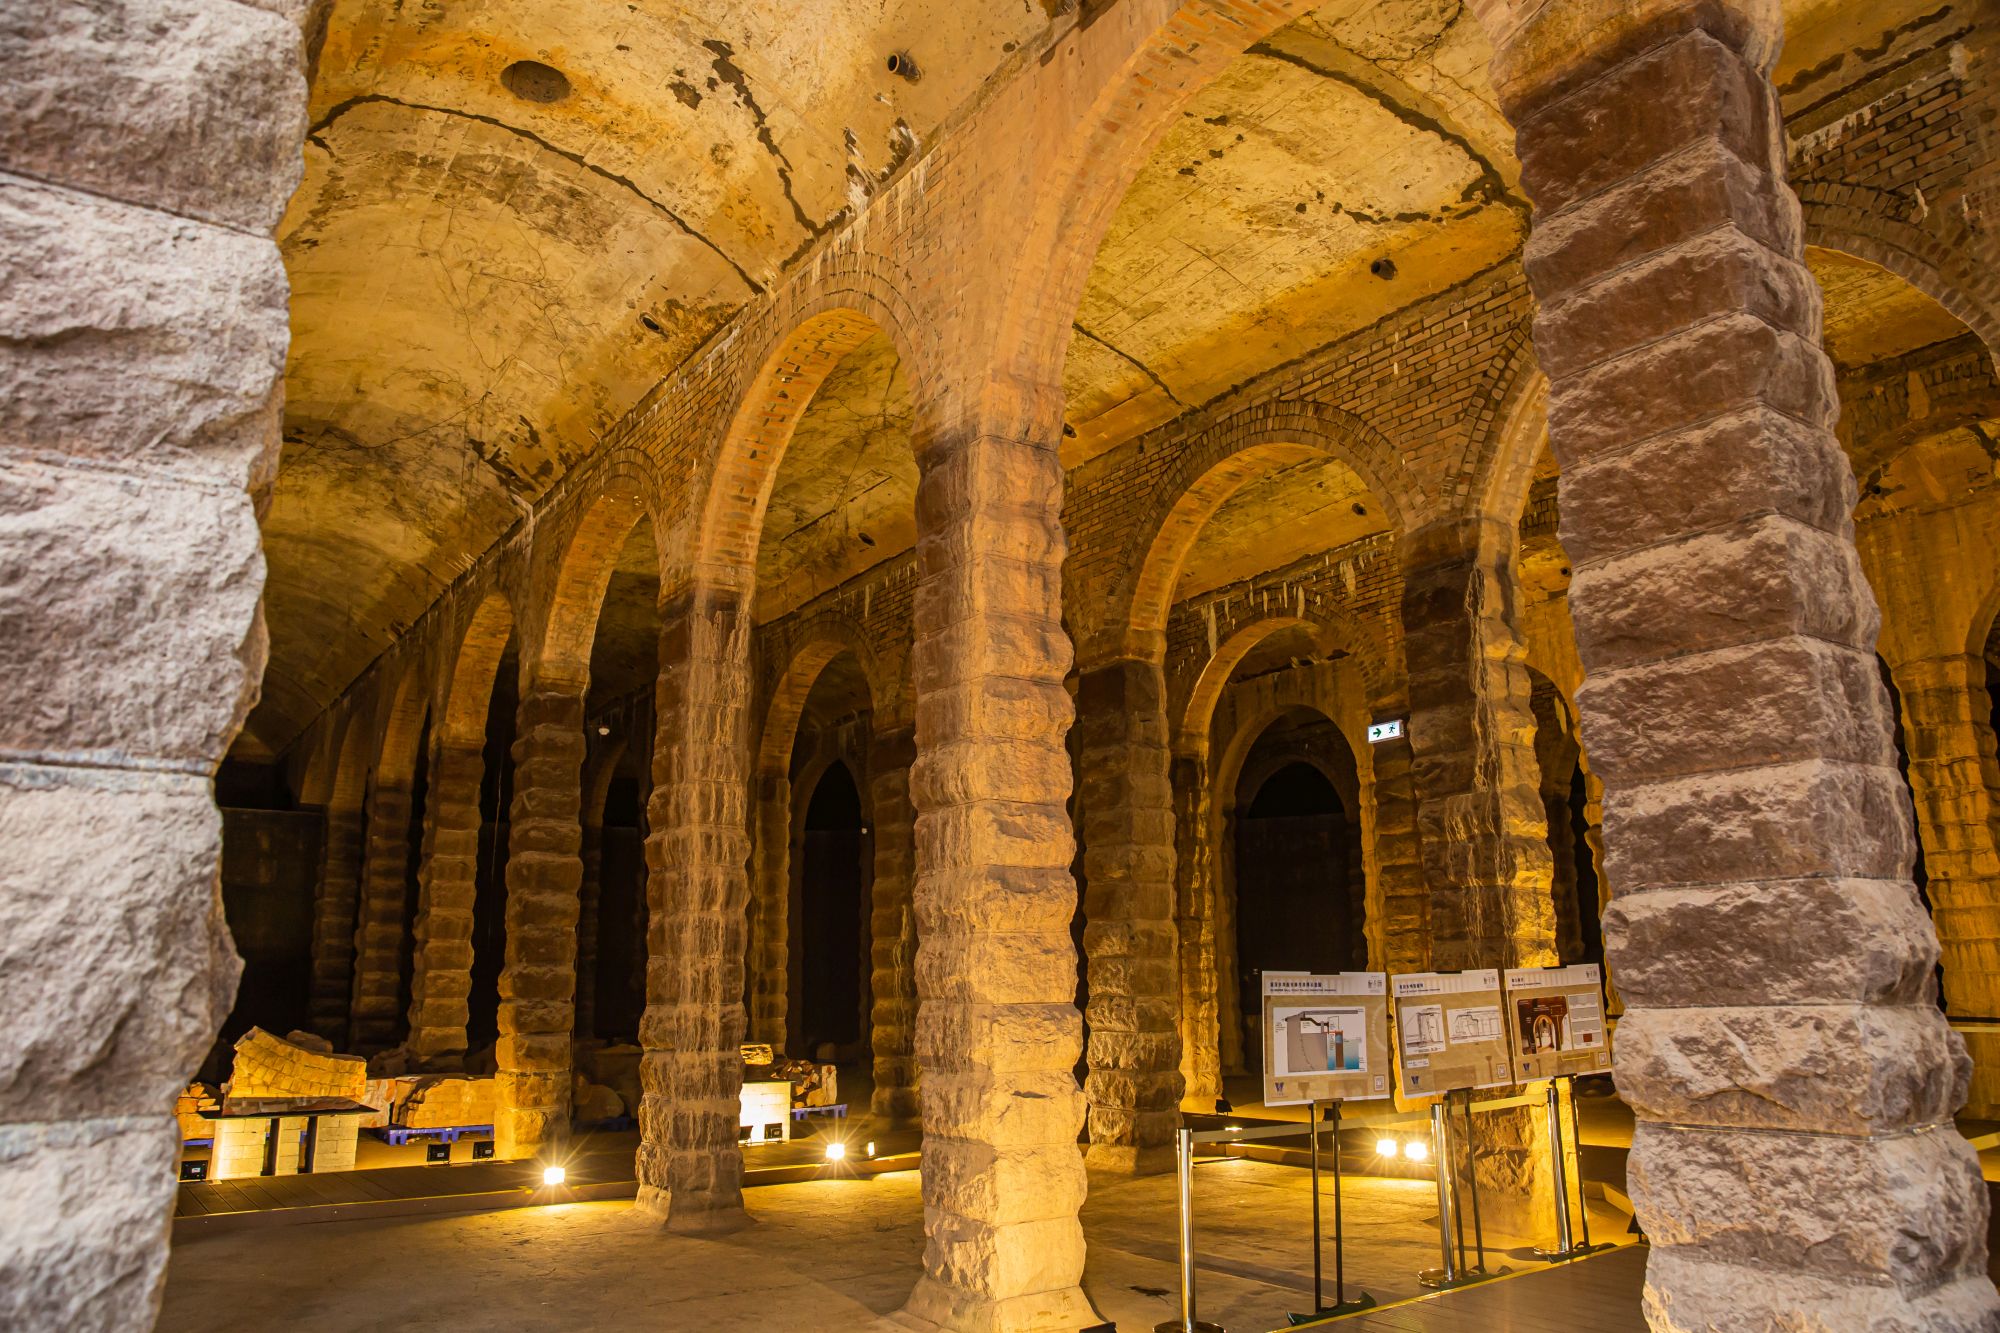 In June last year, the Antiquities Advisory Board confirmed the Grade 1 status of the Ex-Sham Shui Po Service Reservoir (Ex-SSPSR). Its concrete vaulted ceiling, red brick arches and granite piers are styled to replicate the Roman civil engineering works.